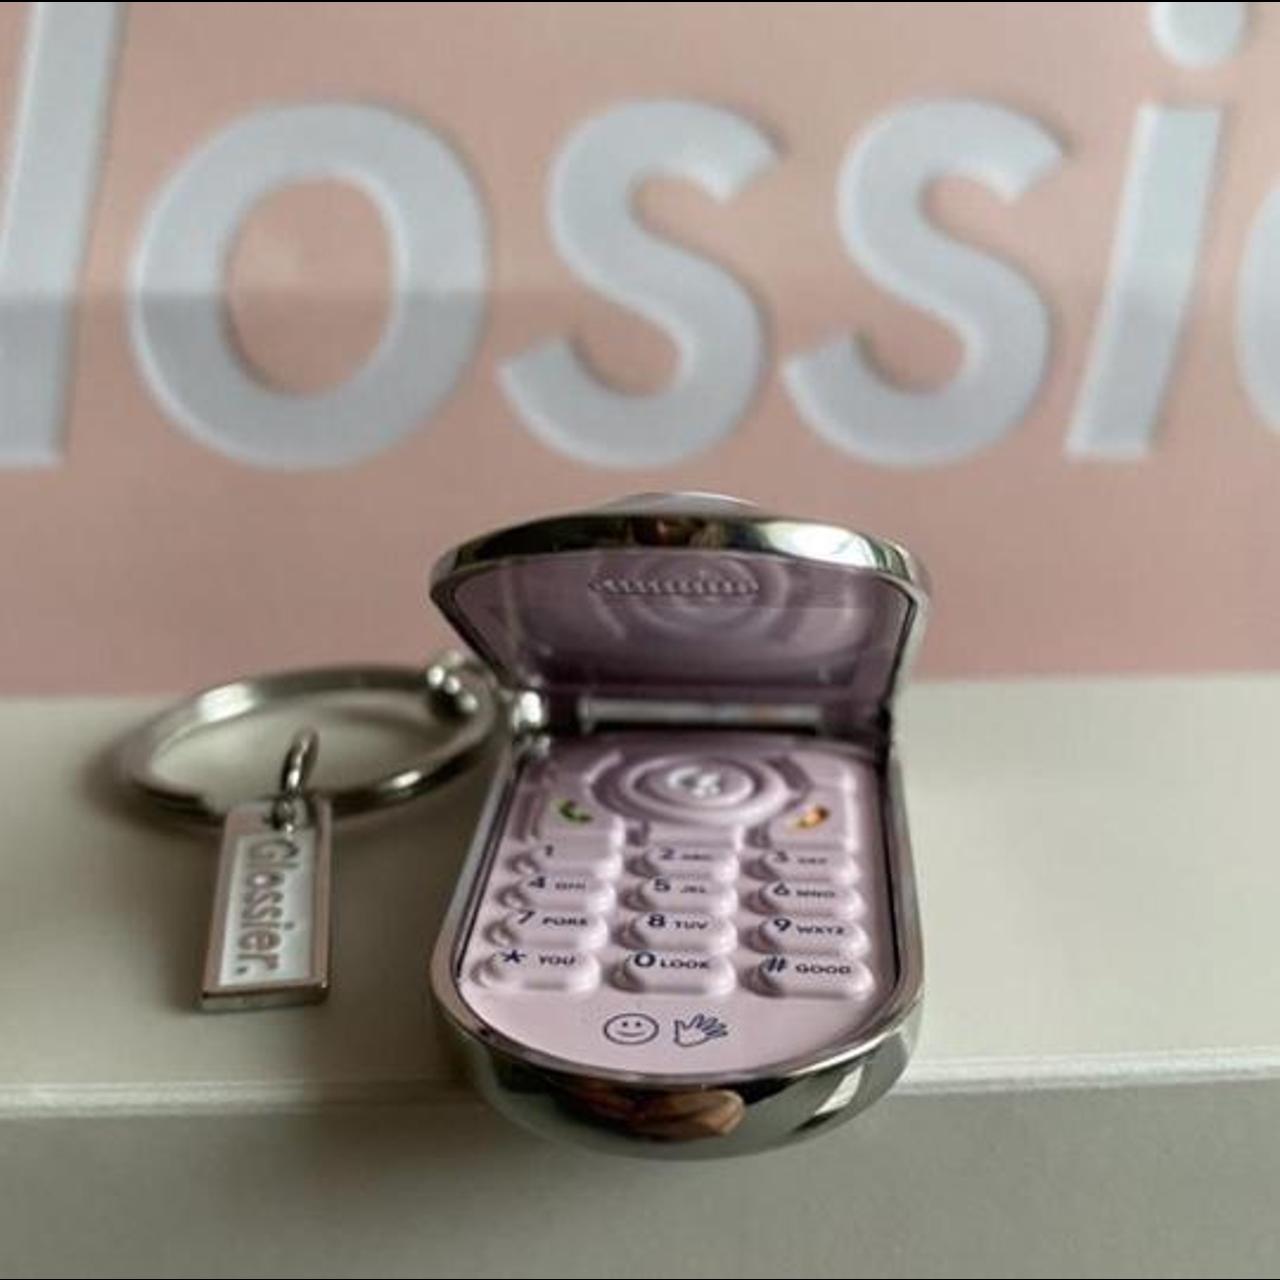 Shop Glossier Unisex Logo Keychains & Bag Charms by angel-pass